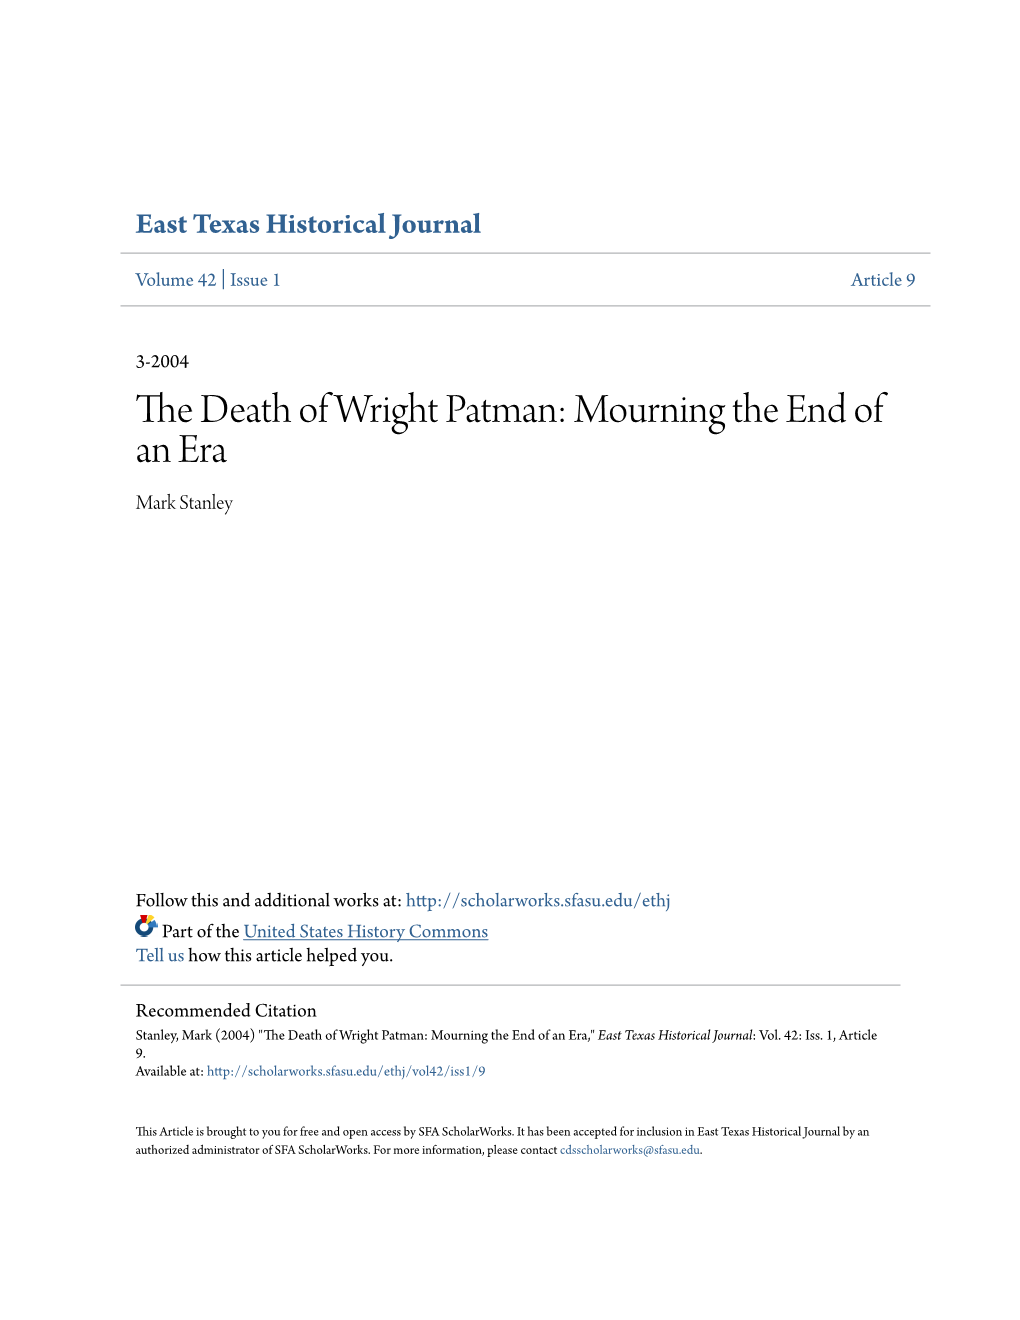 THE DEATH of WRIGHT PATMAN: MOURNING the END of an ERA by Mark Stanley